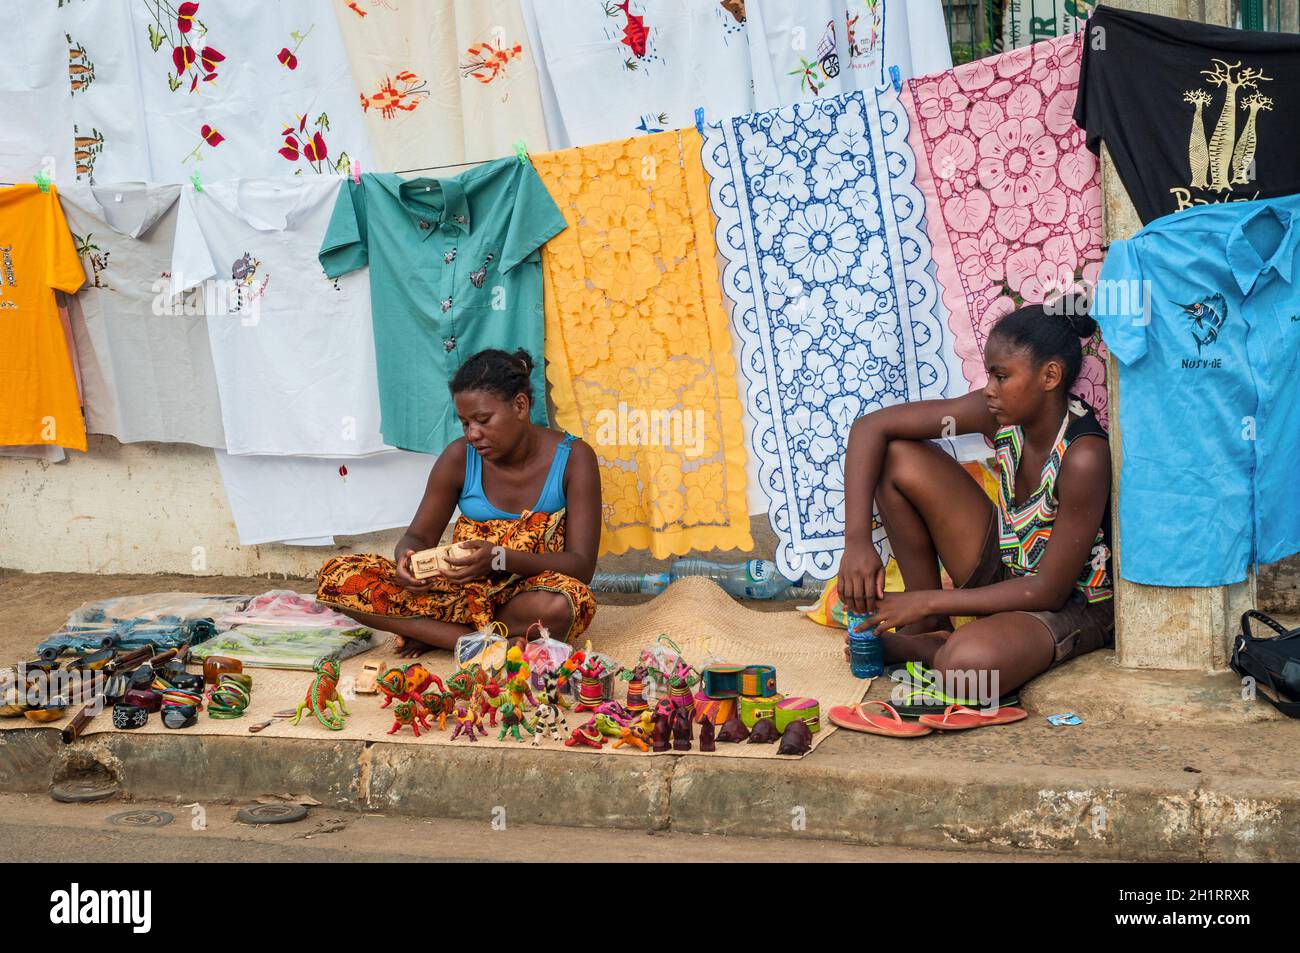 Hell-Ville, Madagascar - December 19, 2015: Indigenous women sell colorful embroidered tablecloths, fabrics and souvenirs on the road at the Hell-Vill Stock Photo